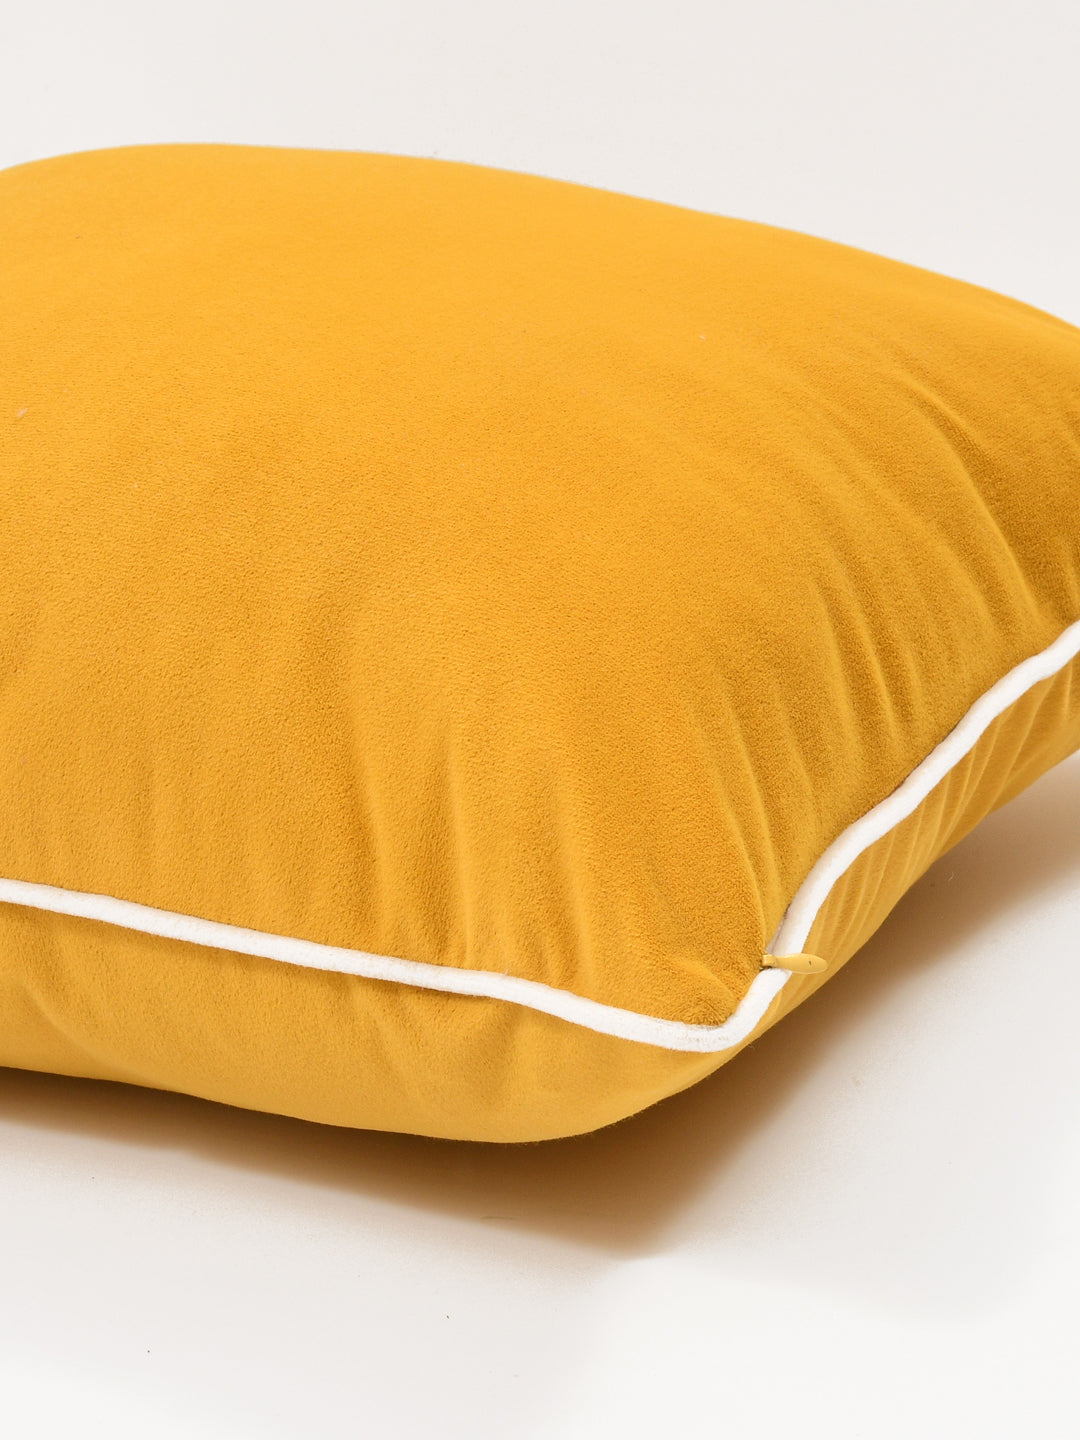 Velvet Cushion Covers; Set of 3; Amber Yellow With White Piping